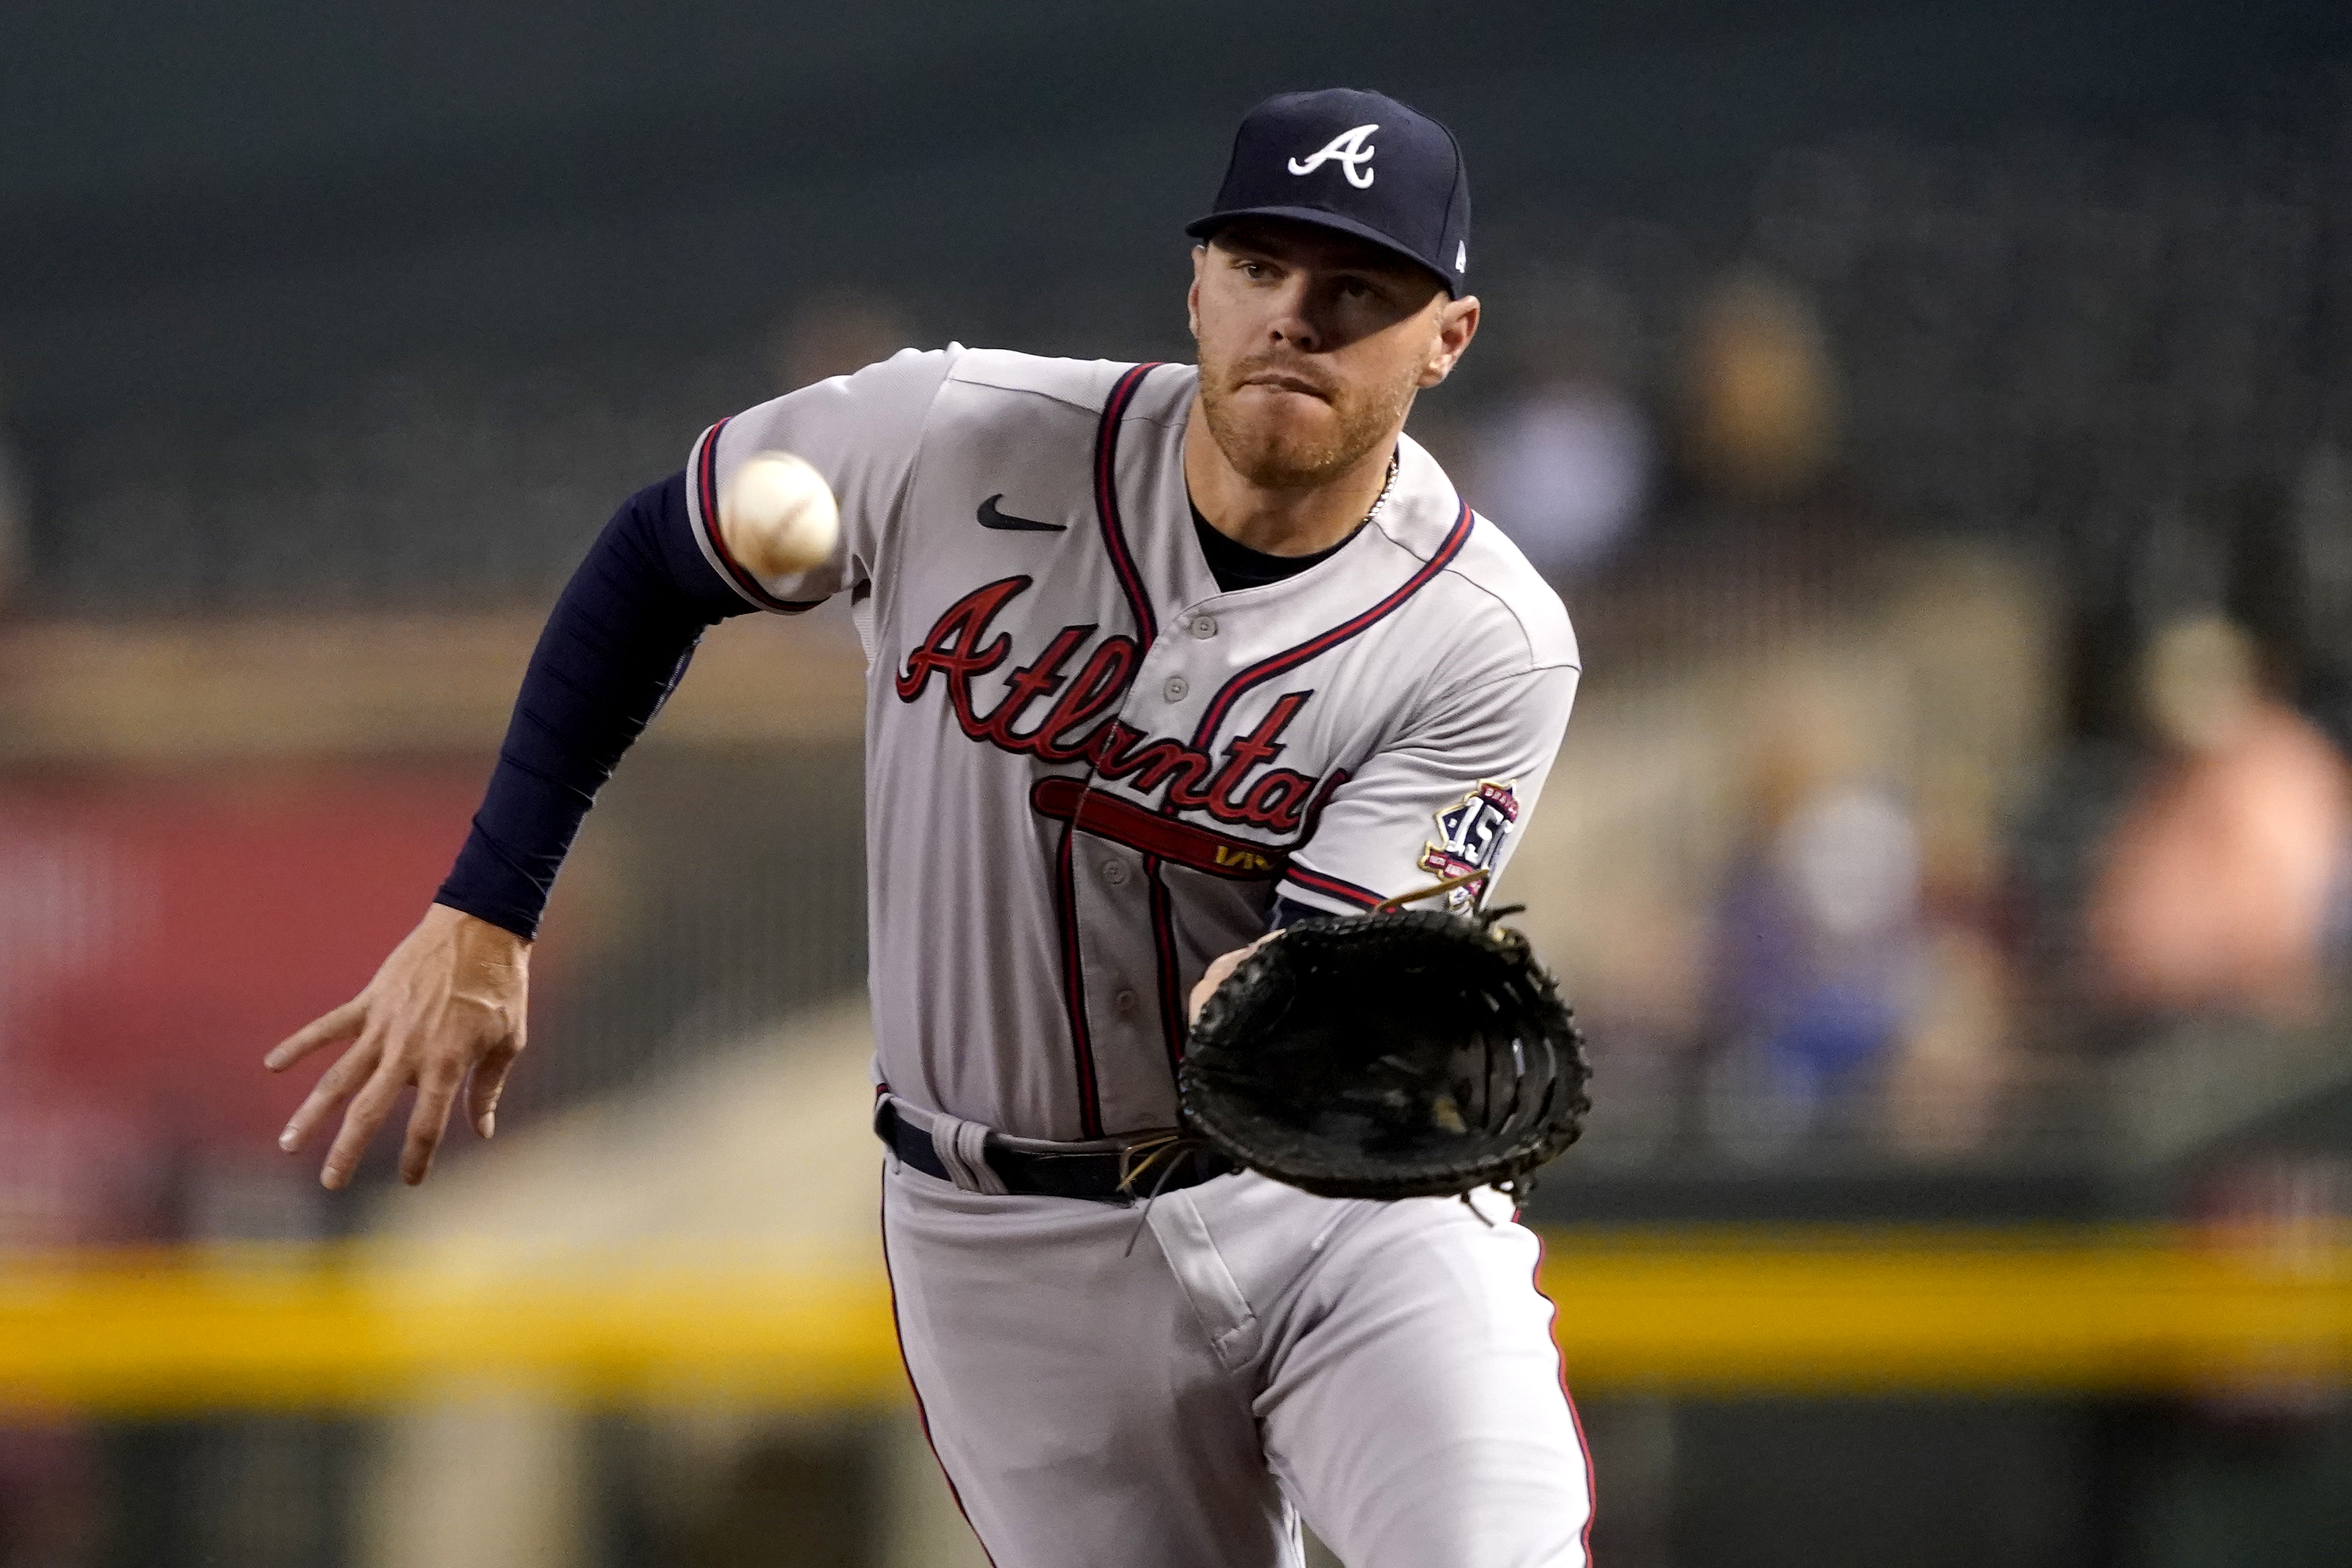 Adam Duvall, Riding With The Braves